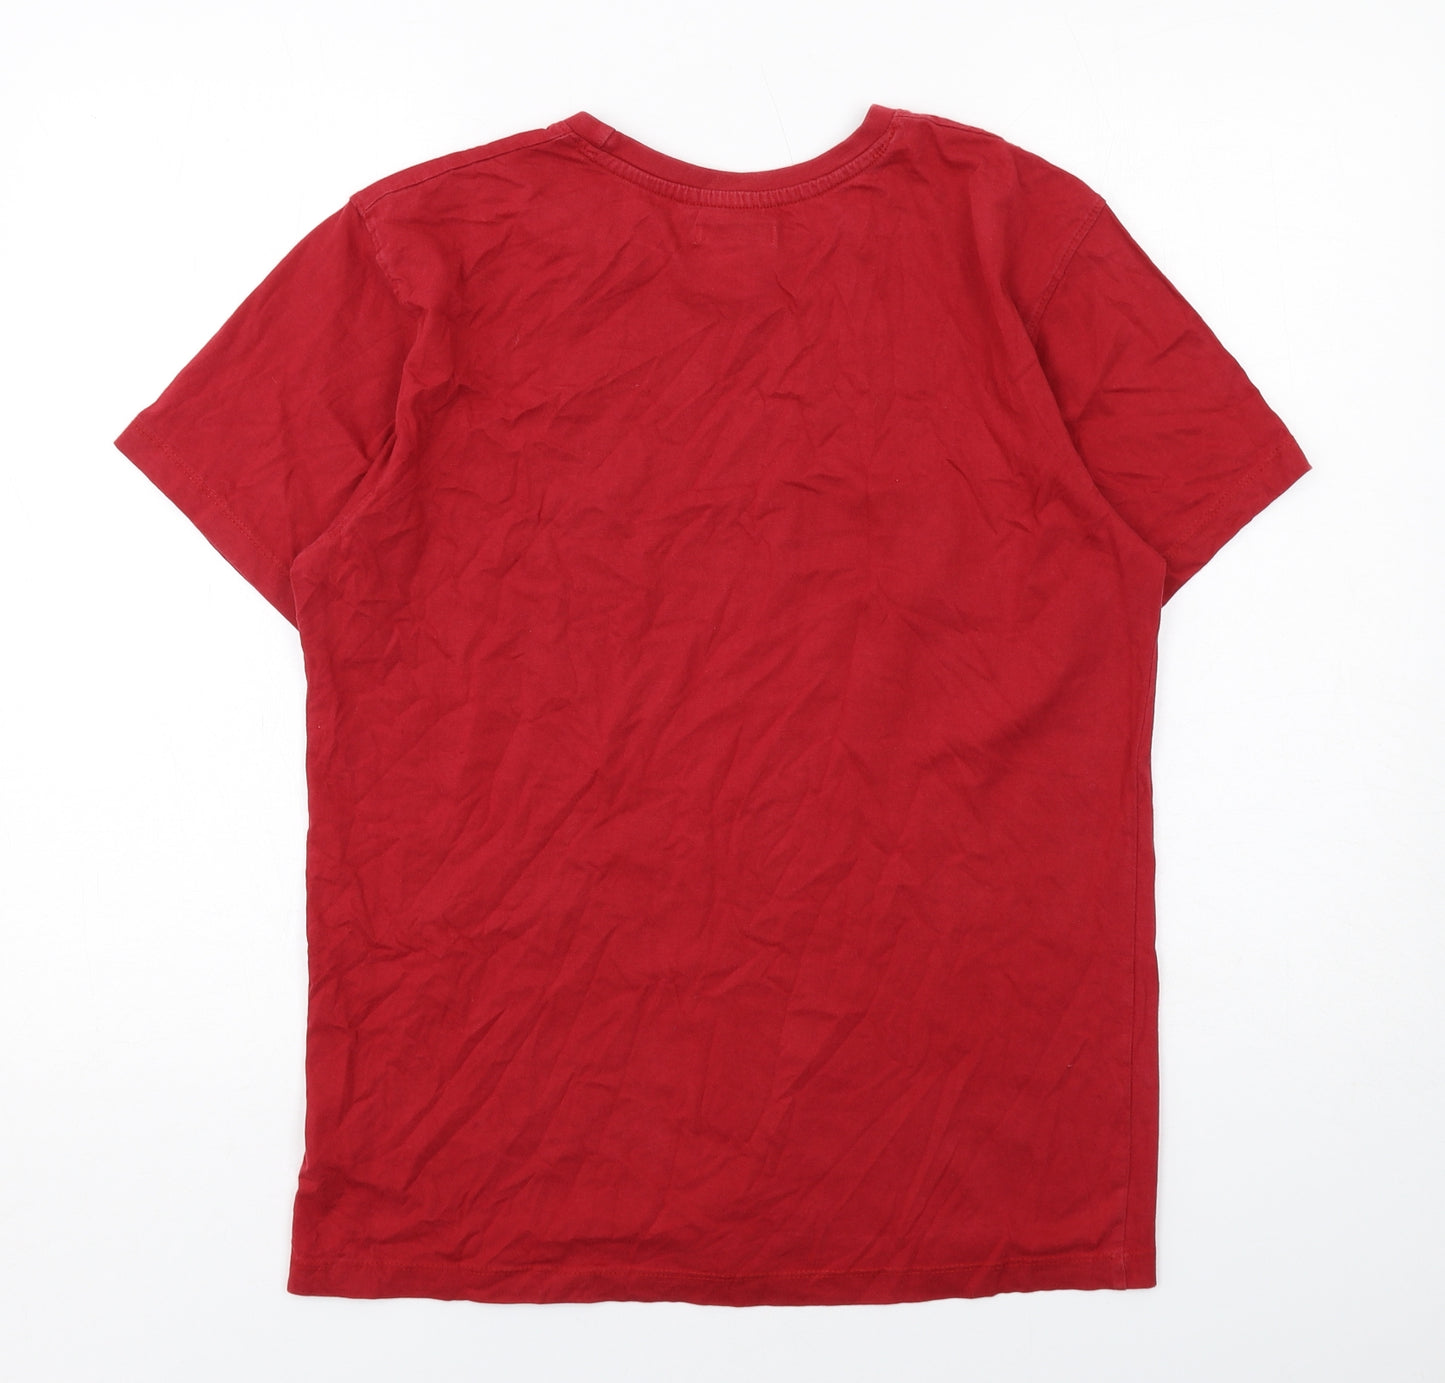 Onfire Mens Red Cotton T-Shirt Size M Round Neck